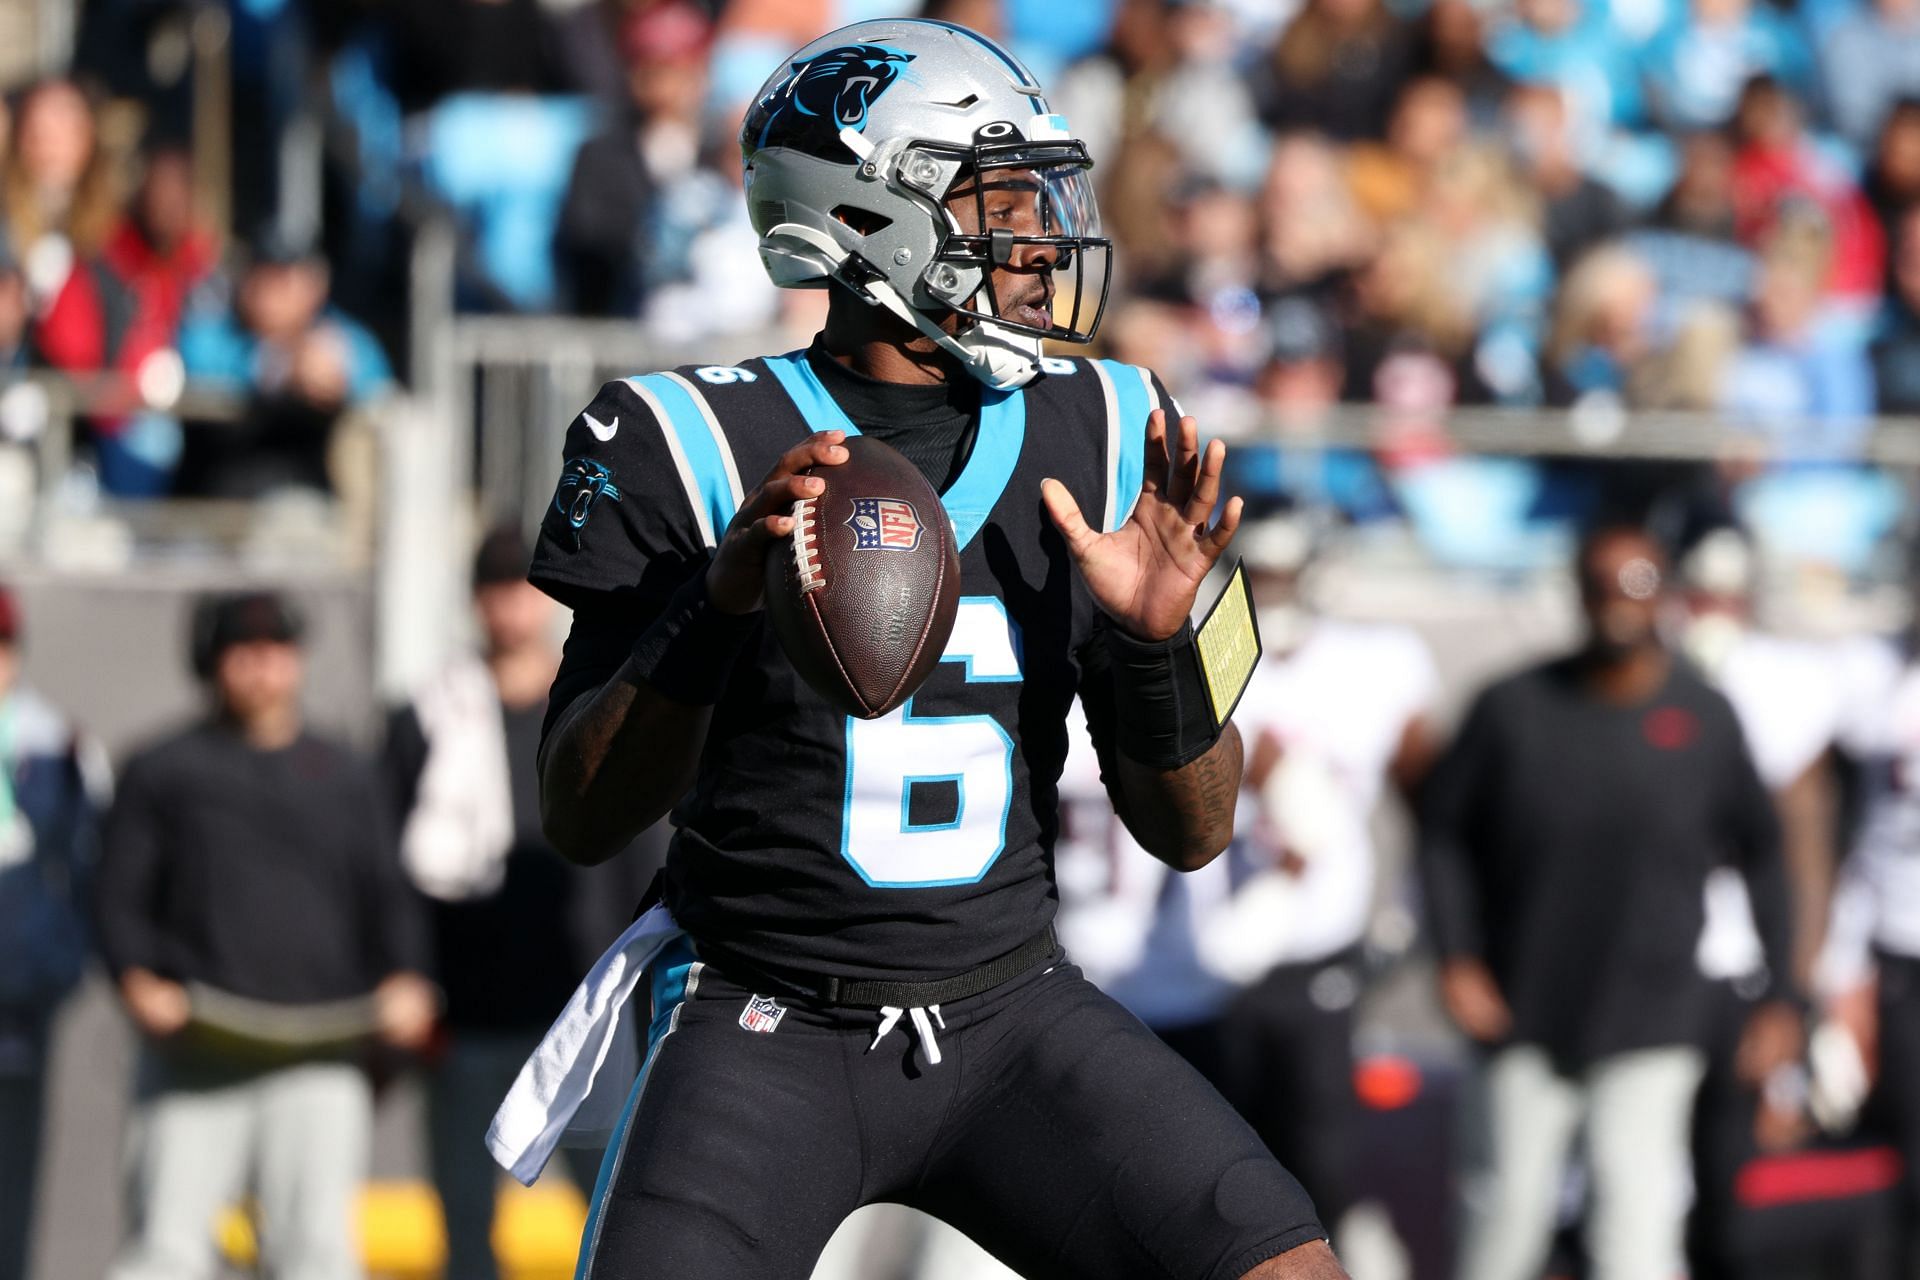 P.J. Walker threw an interception after replacing Cam Newton against the Falcons.